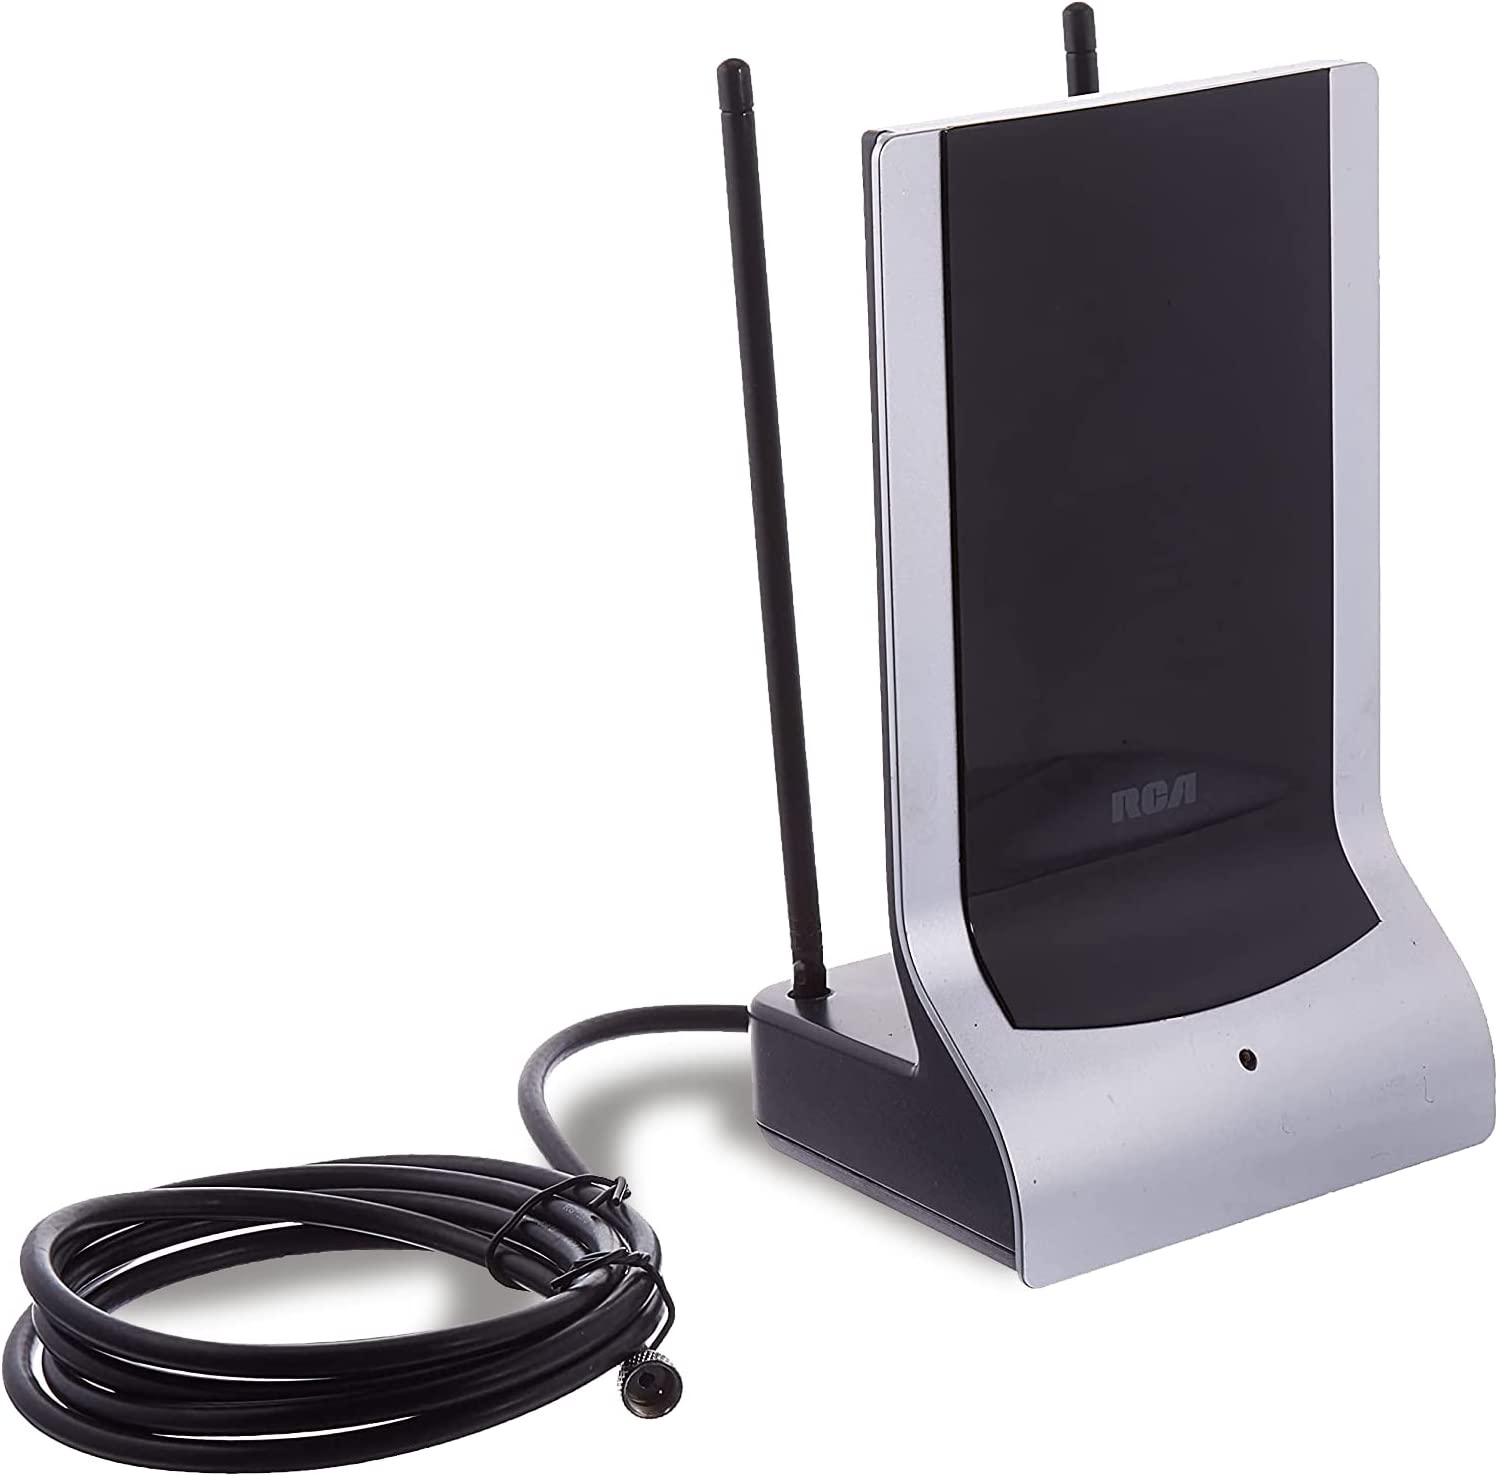 RCA Amplified Indoor HDTV Antenna with SmartBoost [...]